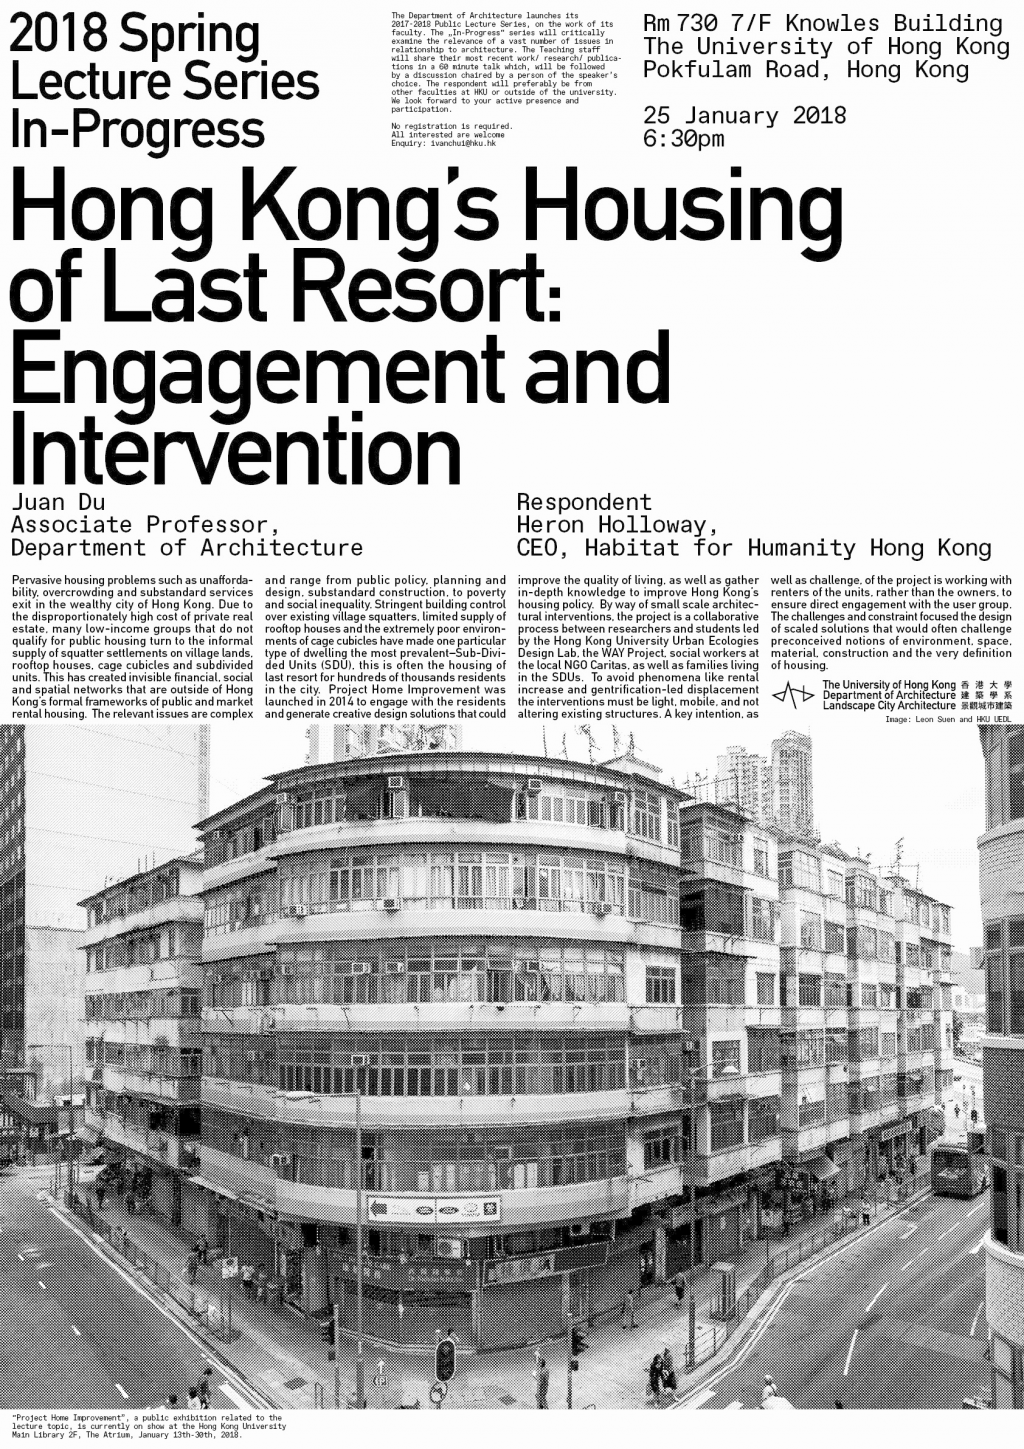 'Hong Kong's Housing of Last Resort: Engagement and Intervention' by Juan Du